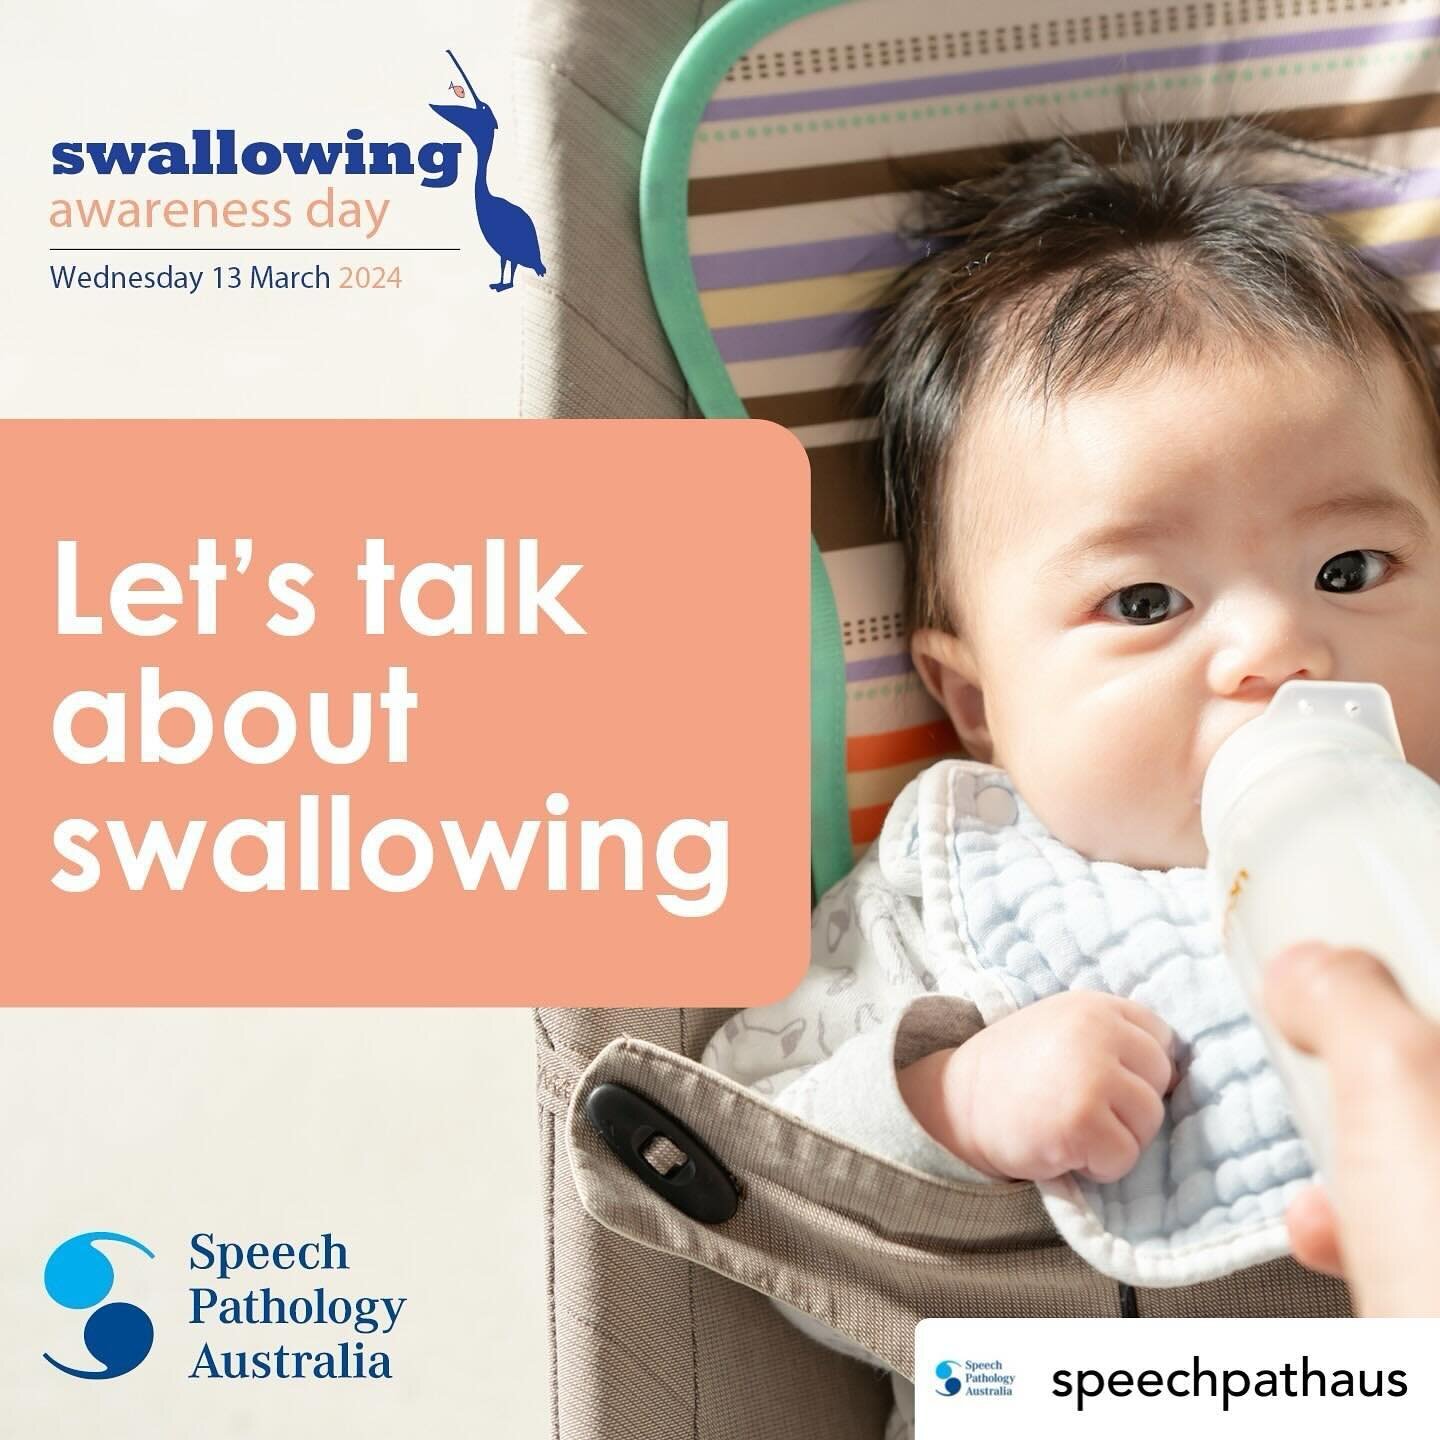 Did you know that people swallow up to 700 times a day? 

And, around one million Australians have difficulty with swallowing, a condition known as dysphagia.

At Kids+ our speech therapy team work with babies through to young adults who need more of